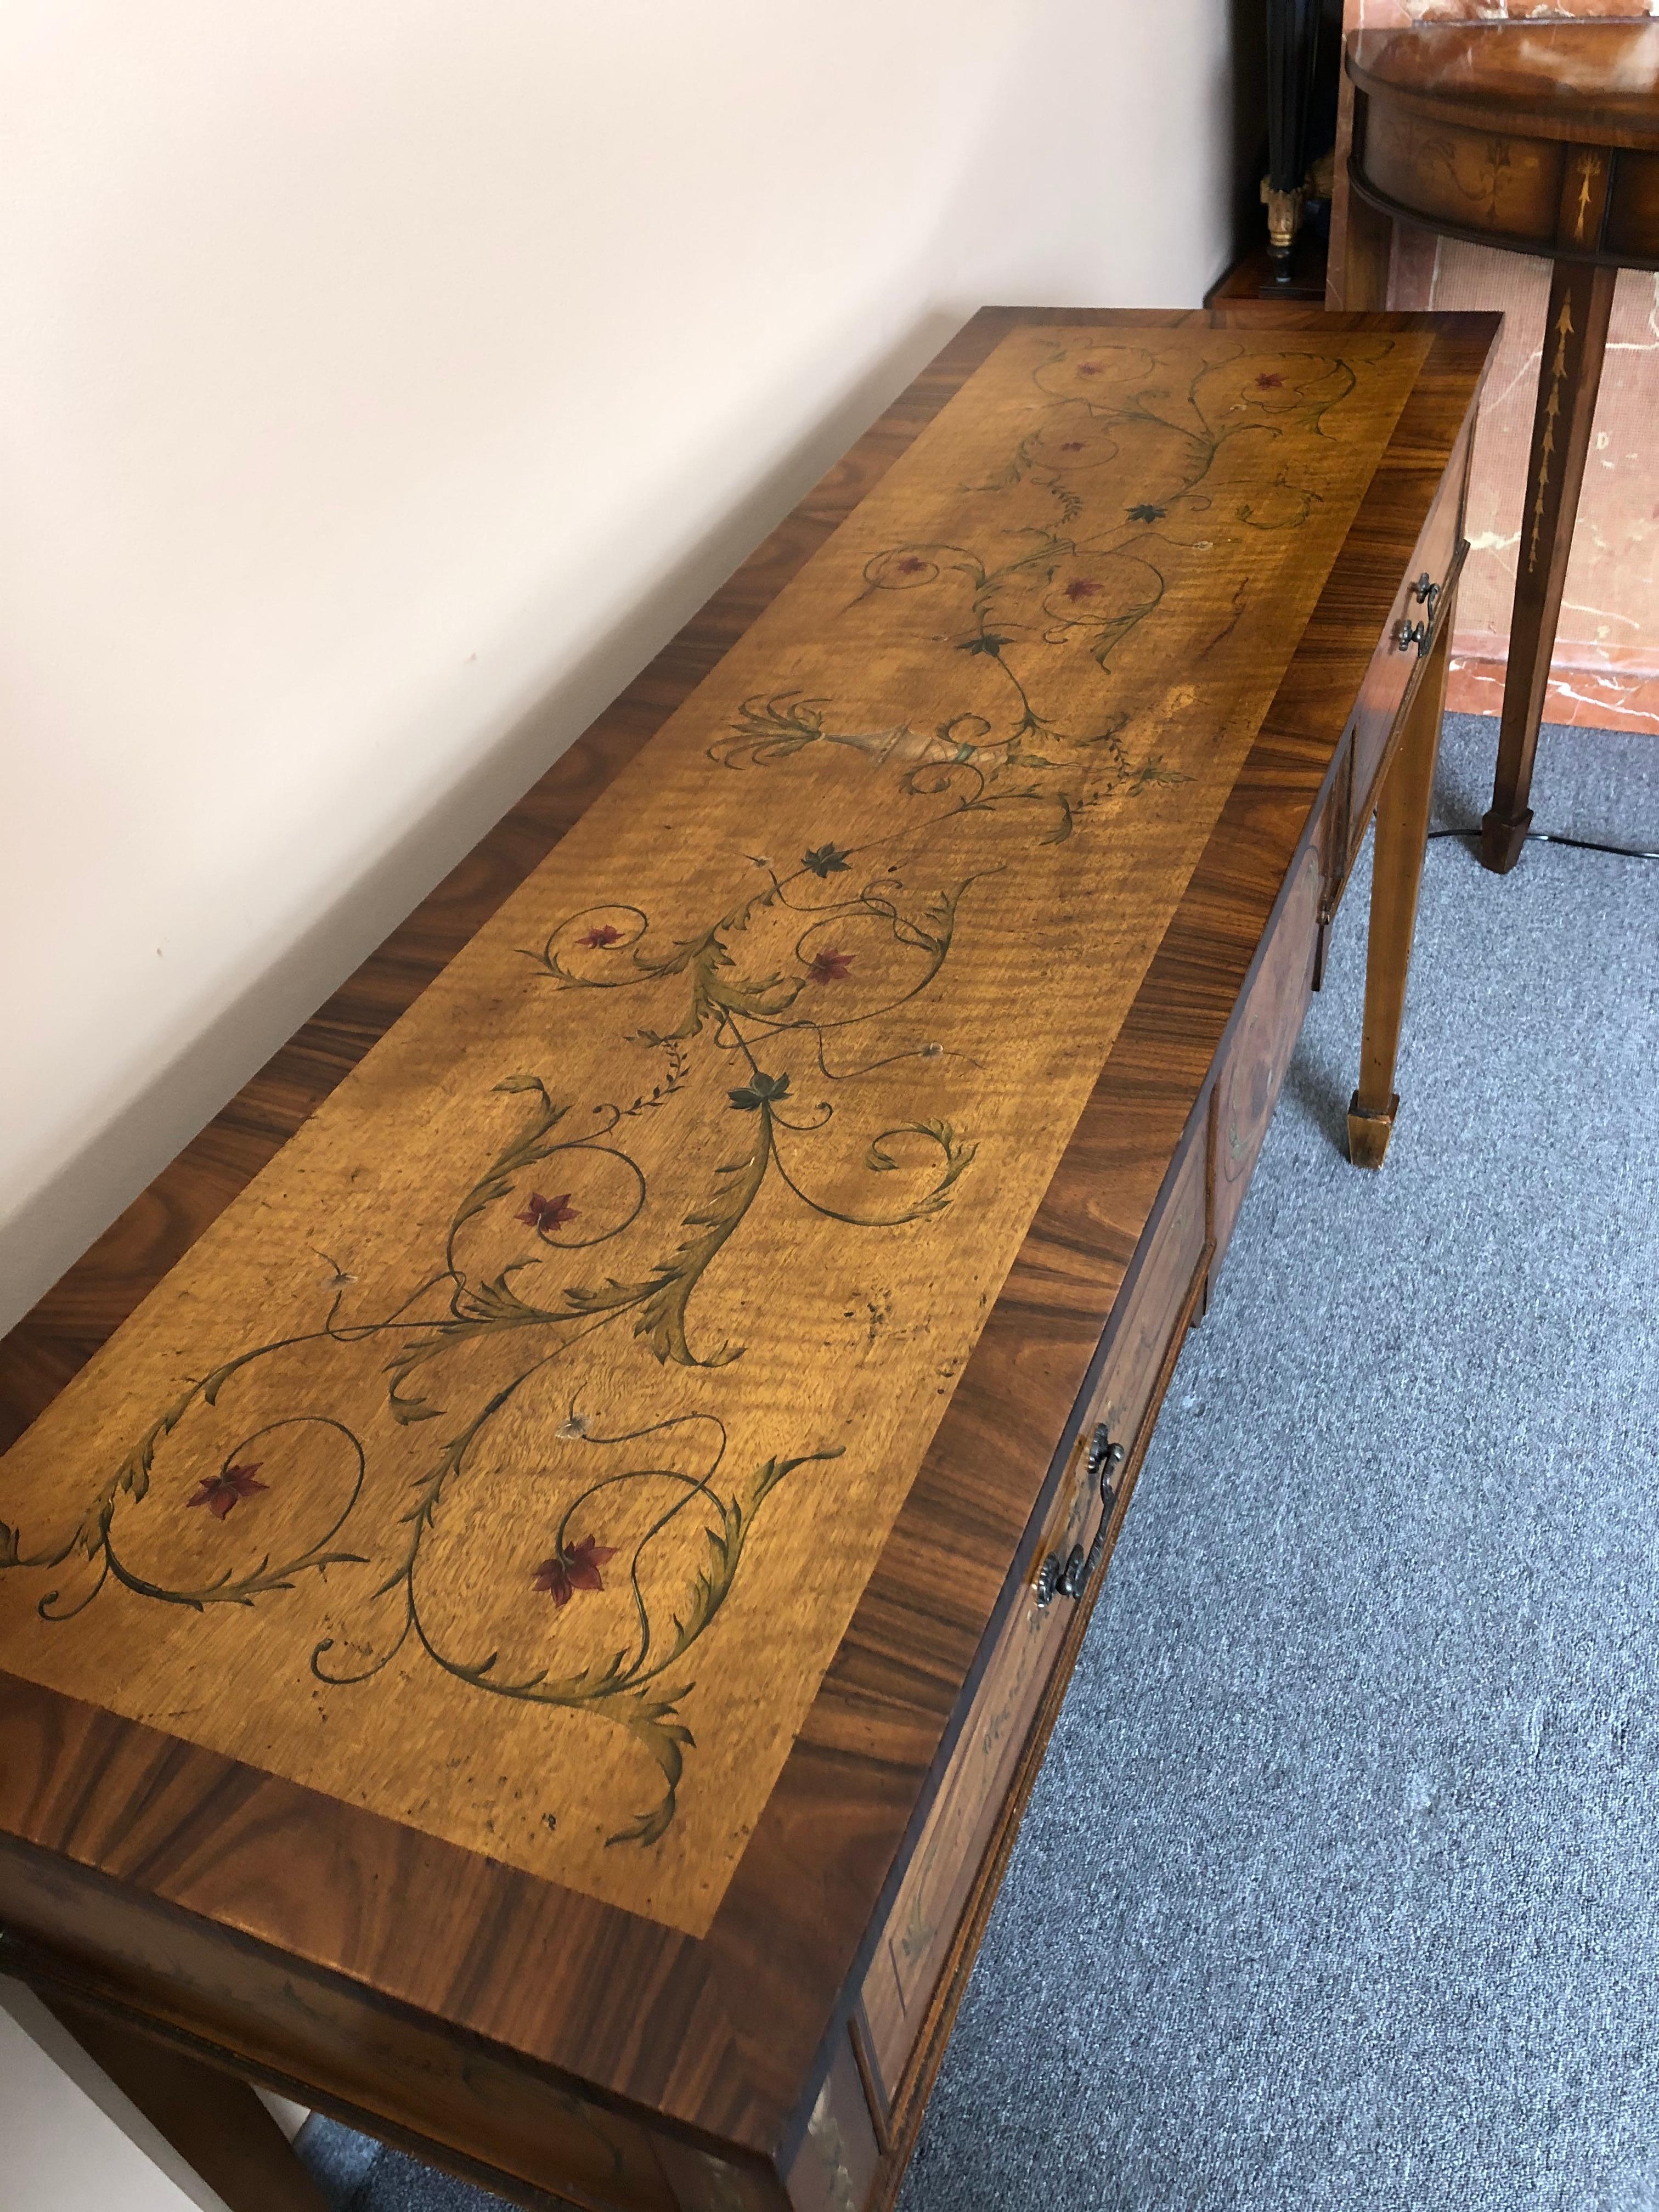 A lovely English banded walnut and mixed wood inlay Adam style rectangular console table having pretty hand painted embellishments.